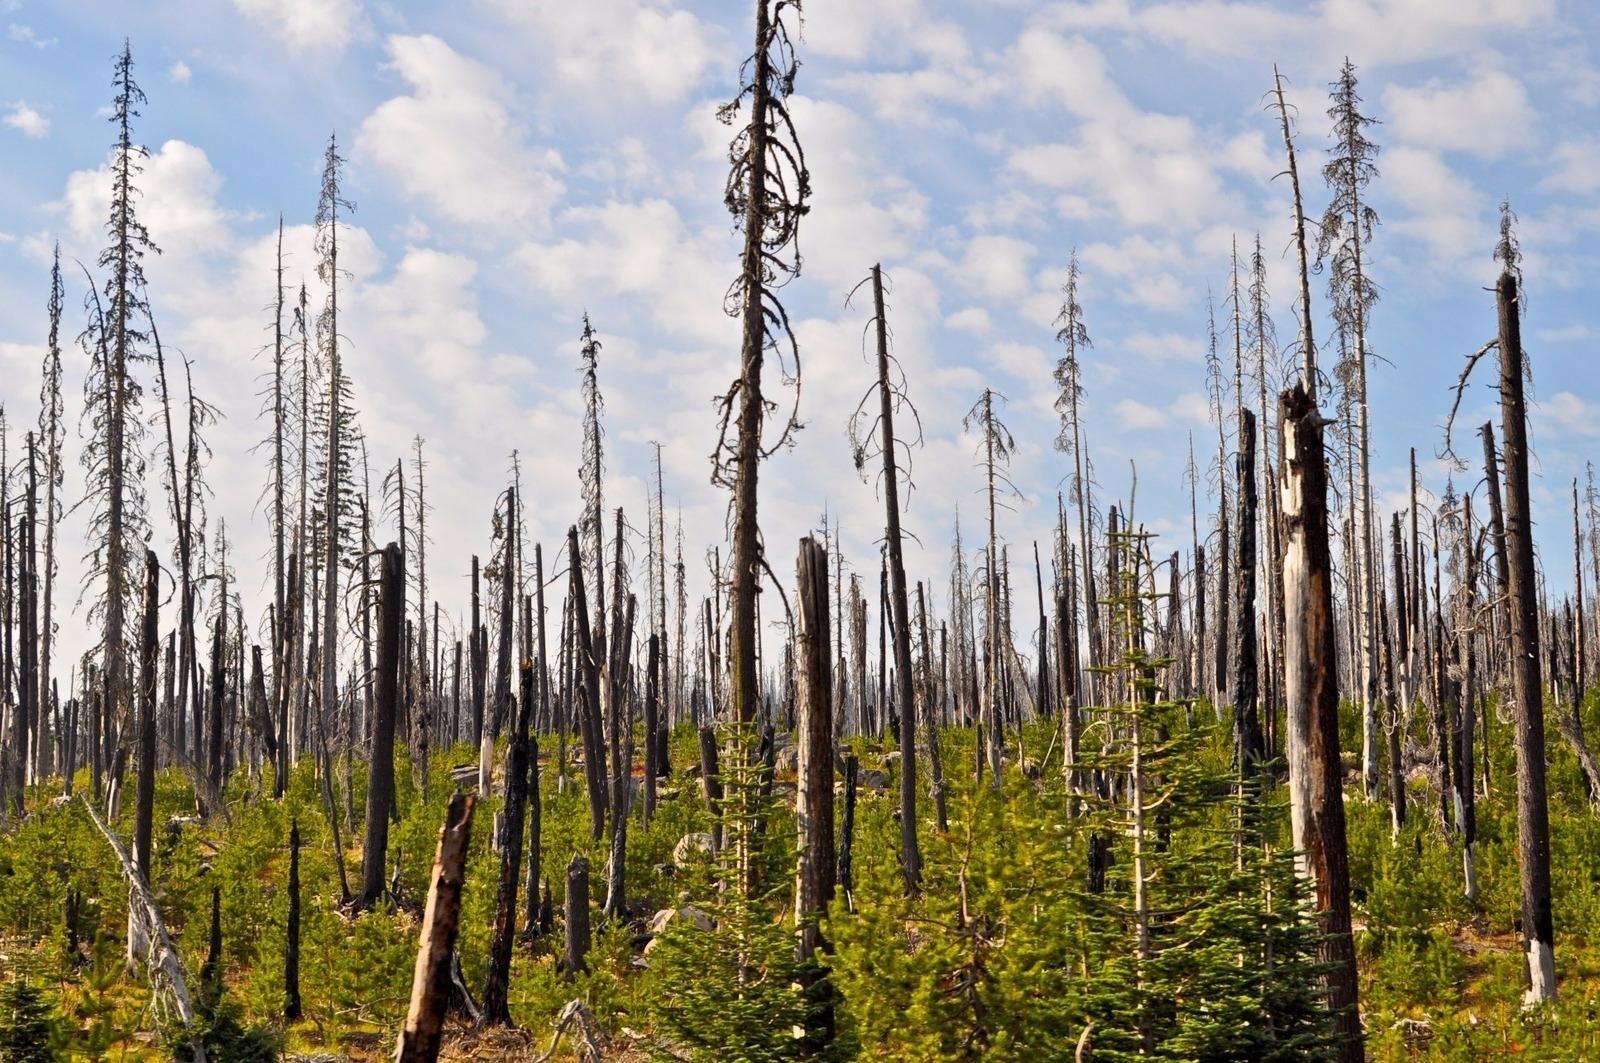 Massive forest fires can often result in a shifting of ecosystems, as regeneration becomes a more difficult task, especially in drier and warmer areas.